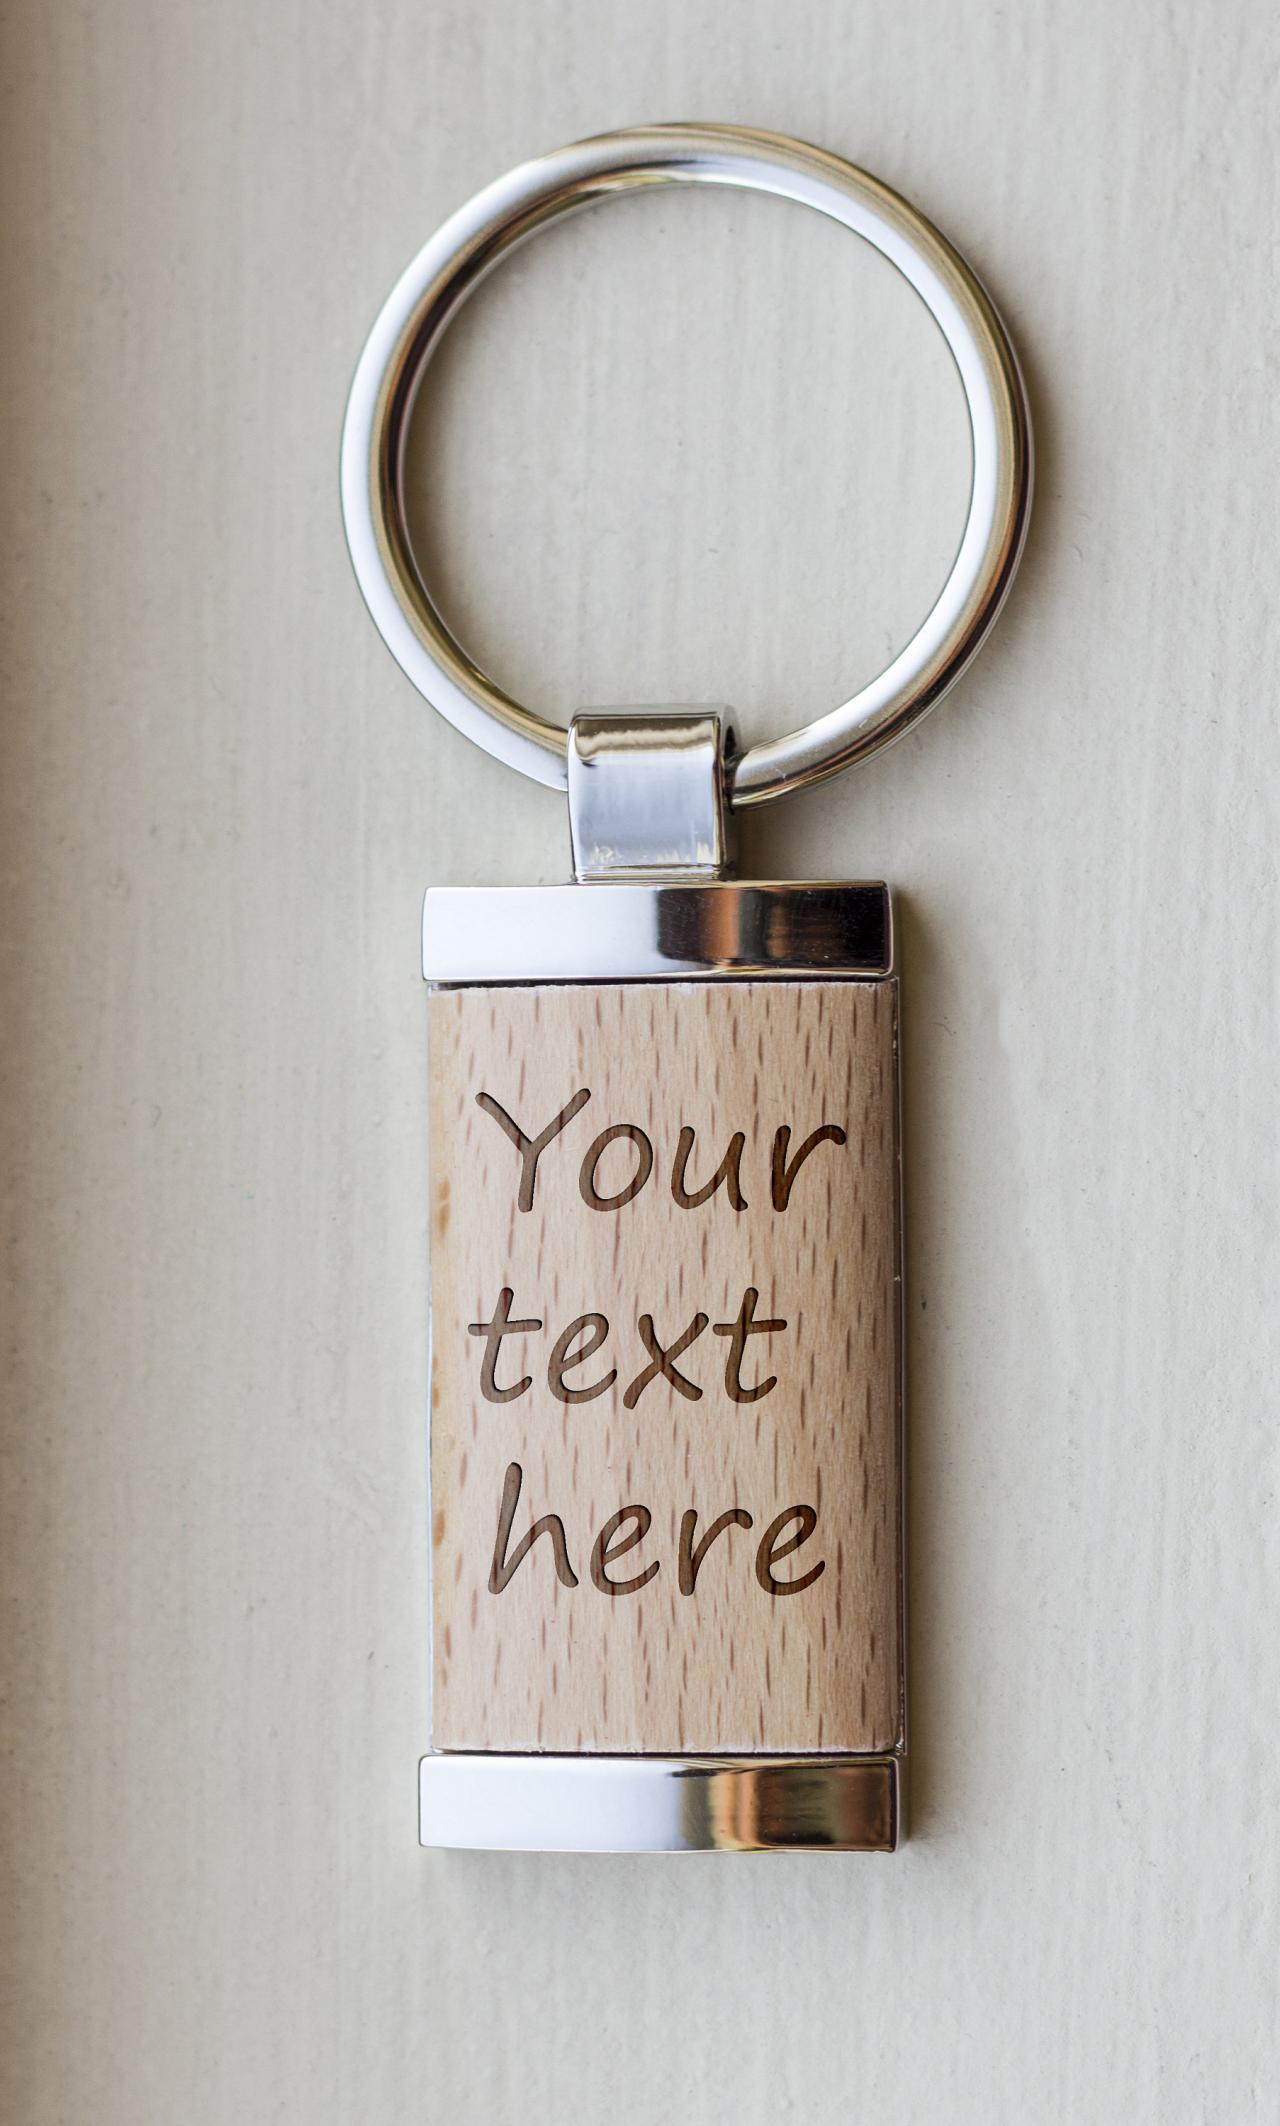 Personalize Key Chain, Customize Key Chain, Love Key Chain,custom Key Chain, Wood Key Chain, Gift For Dad ,father's Day Gift